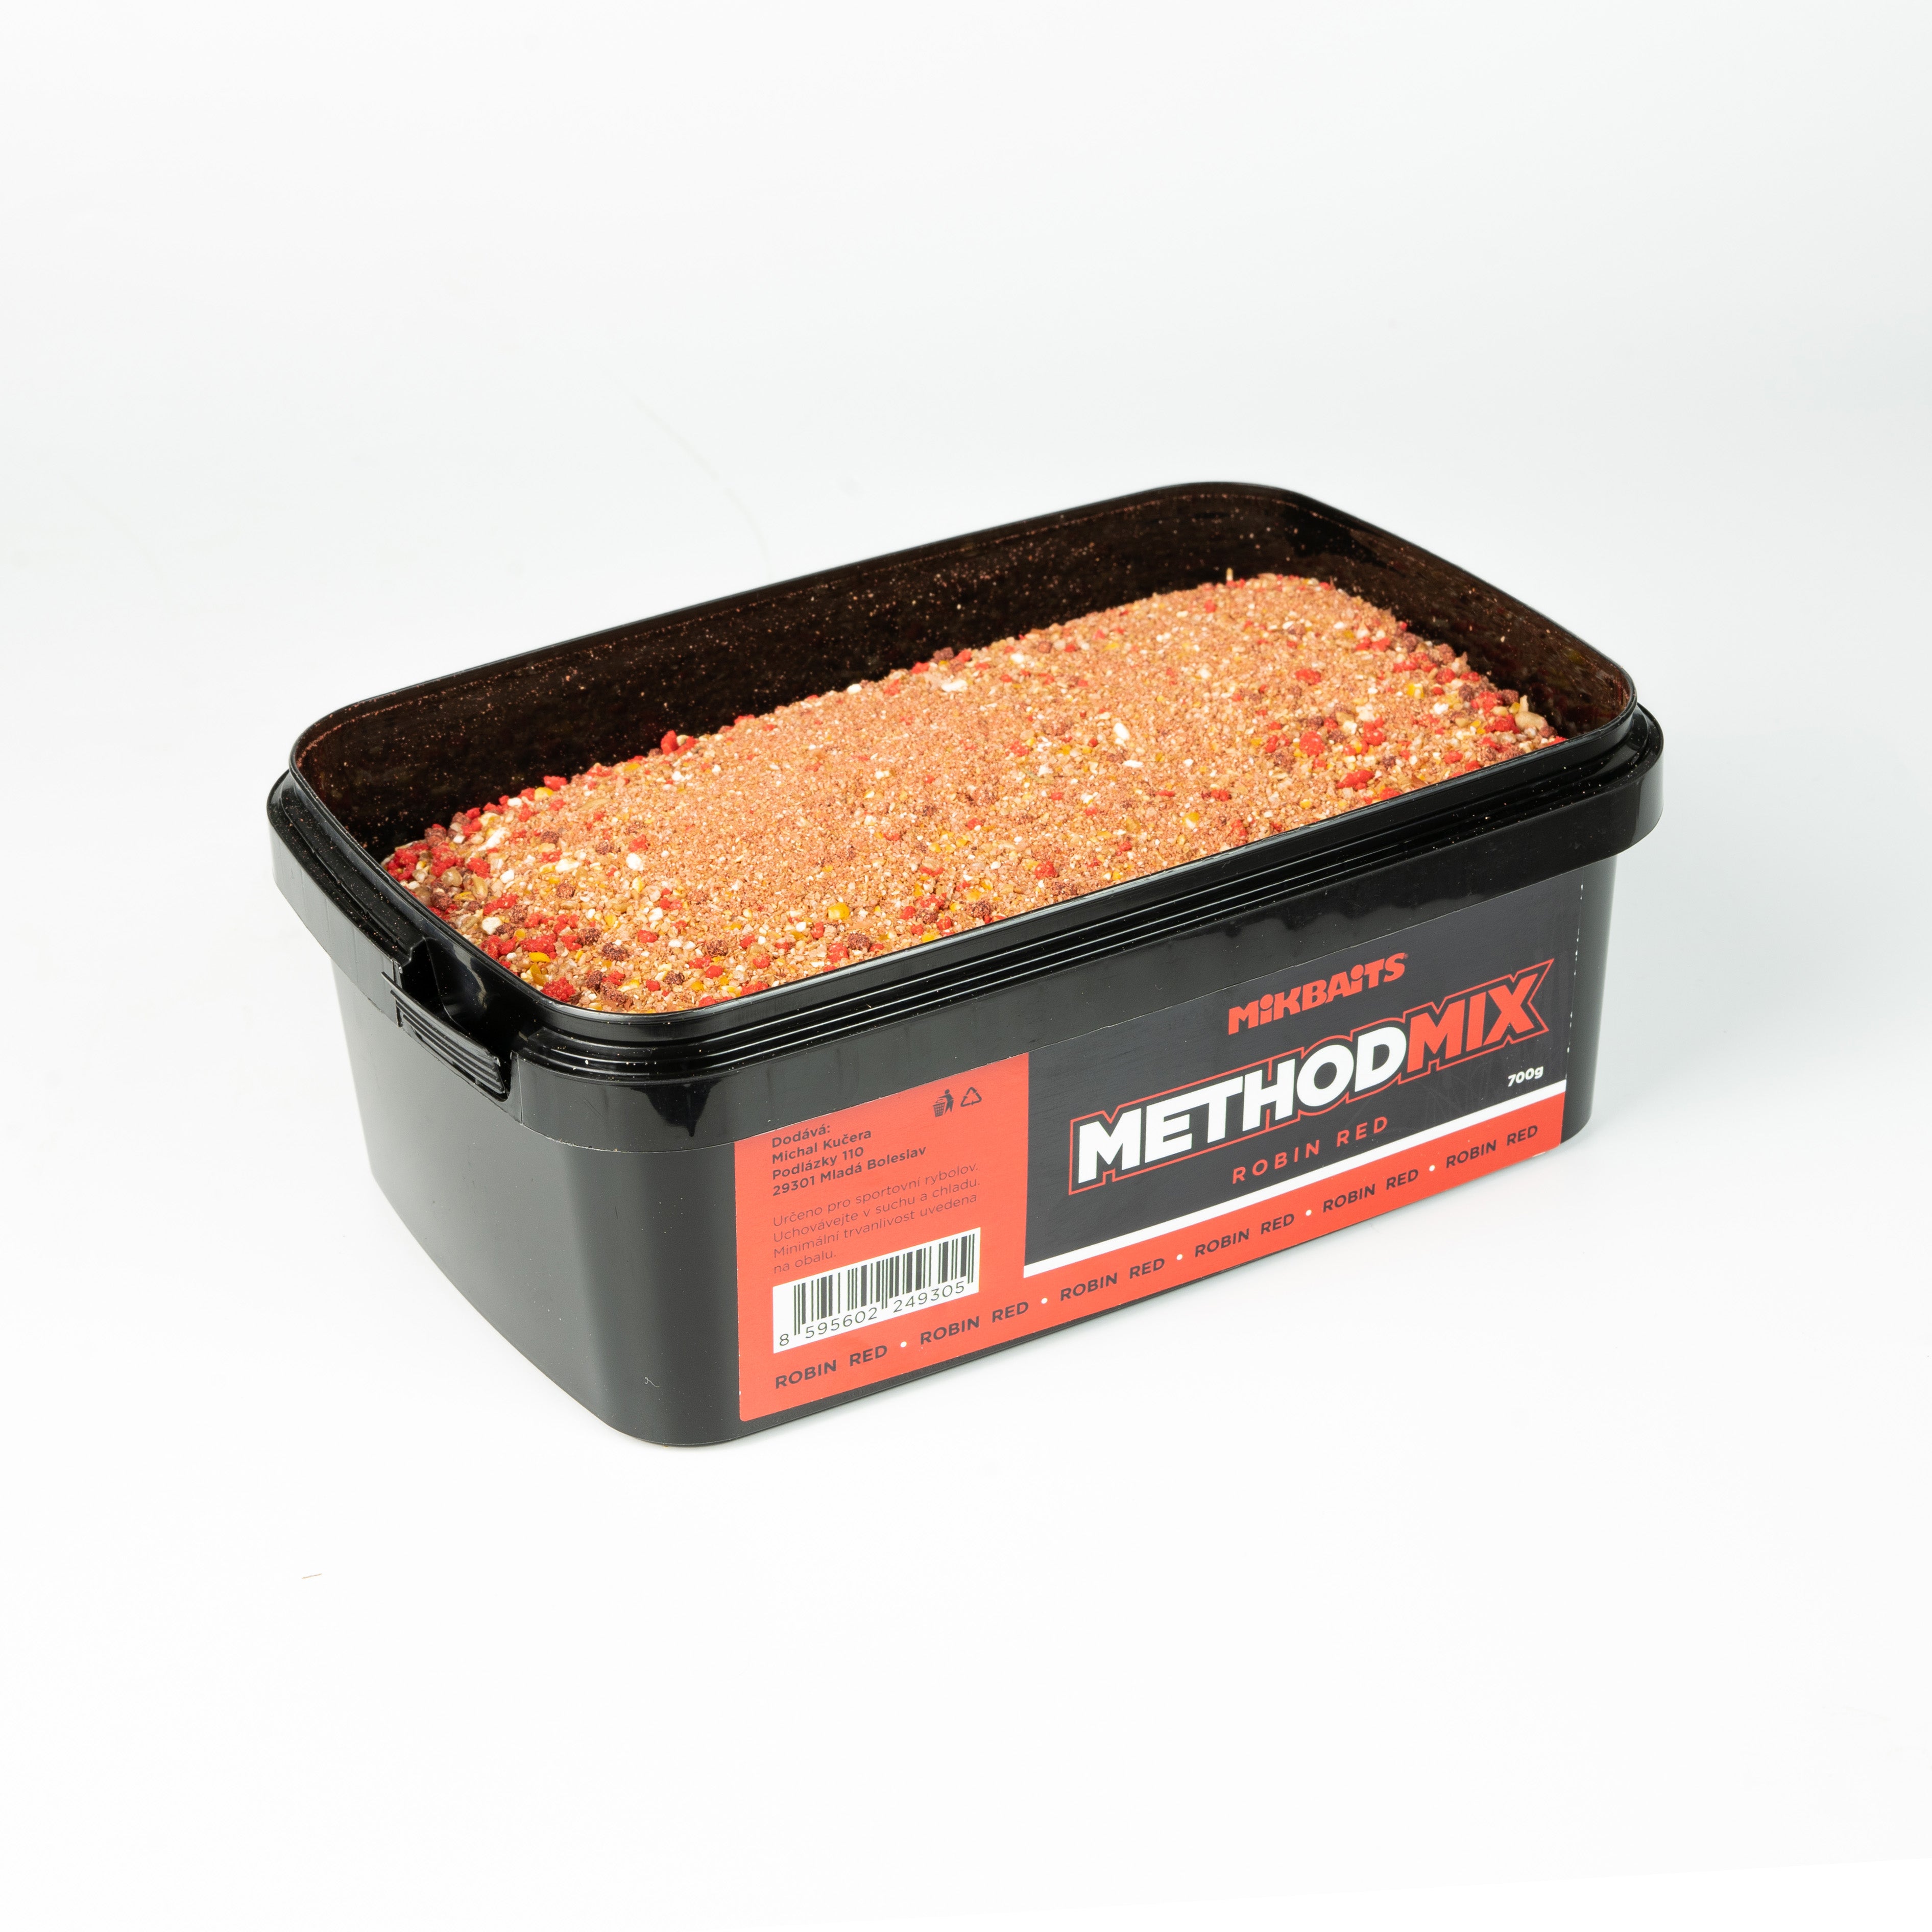 Mikbaits Method mix 700g Robin Red